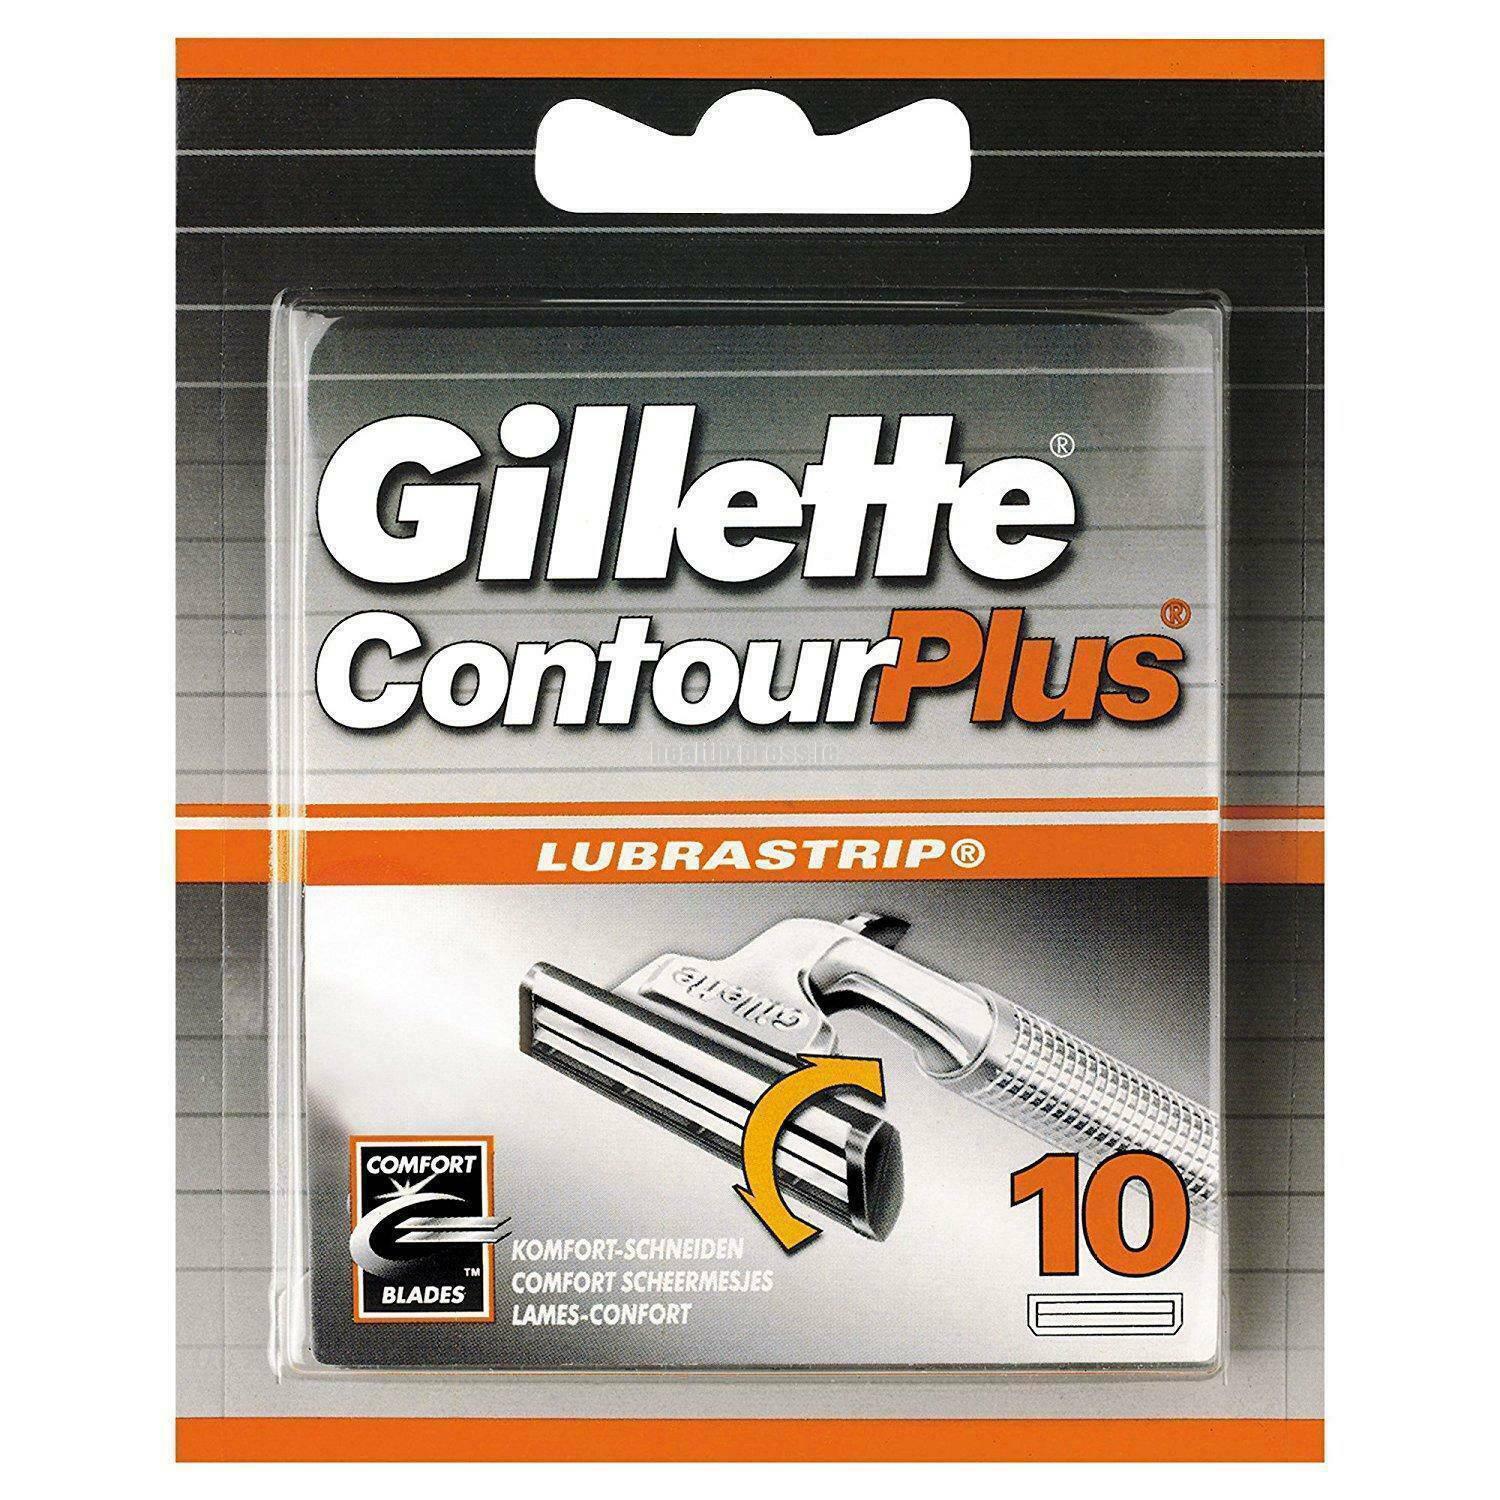 Gillette Contour Plus Razor Blades for Men with Comfort System, Pack of 10 Refill Blades - Healthxpress.ie